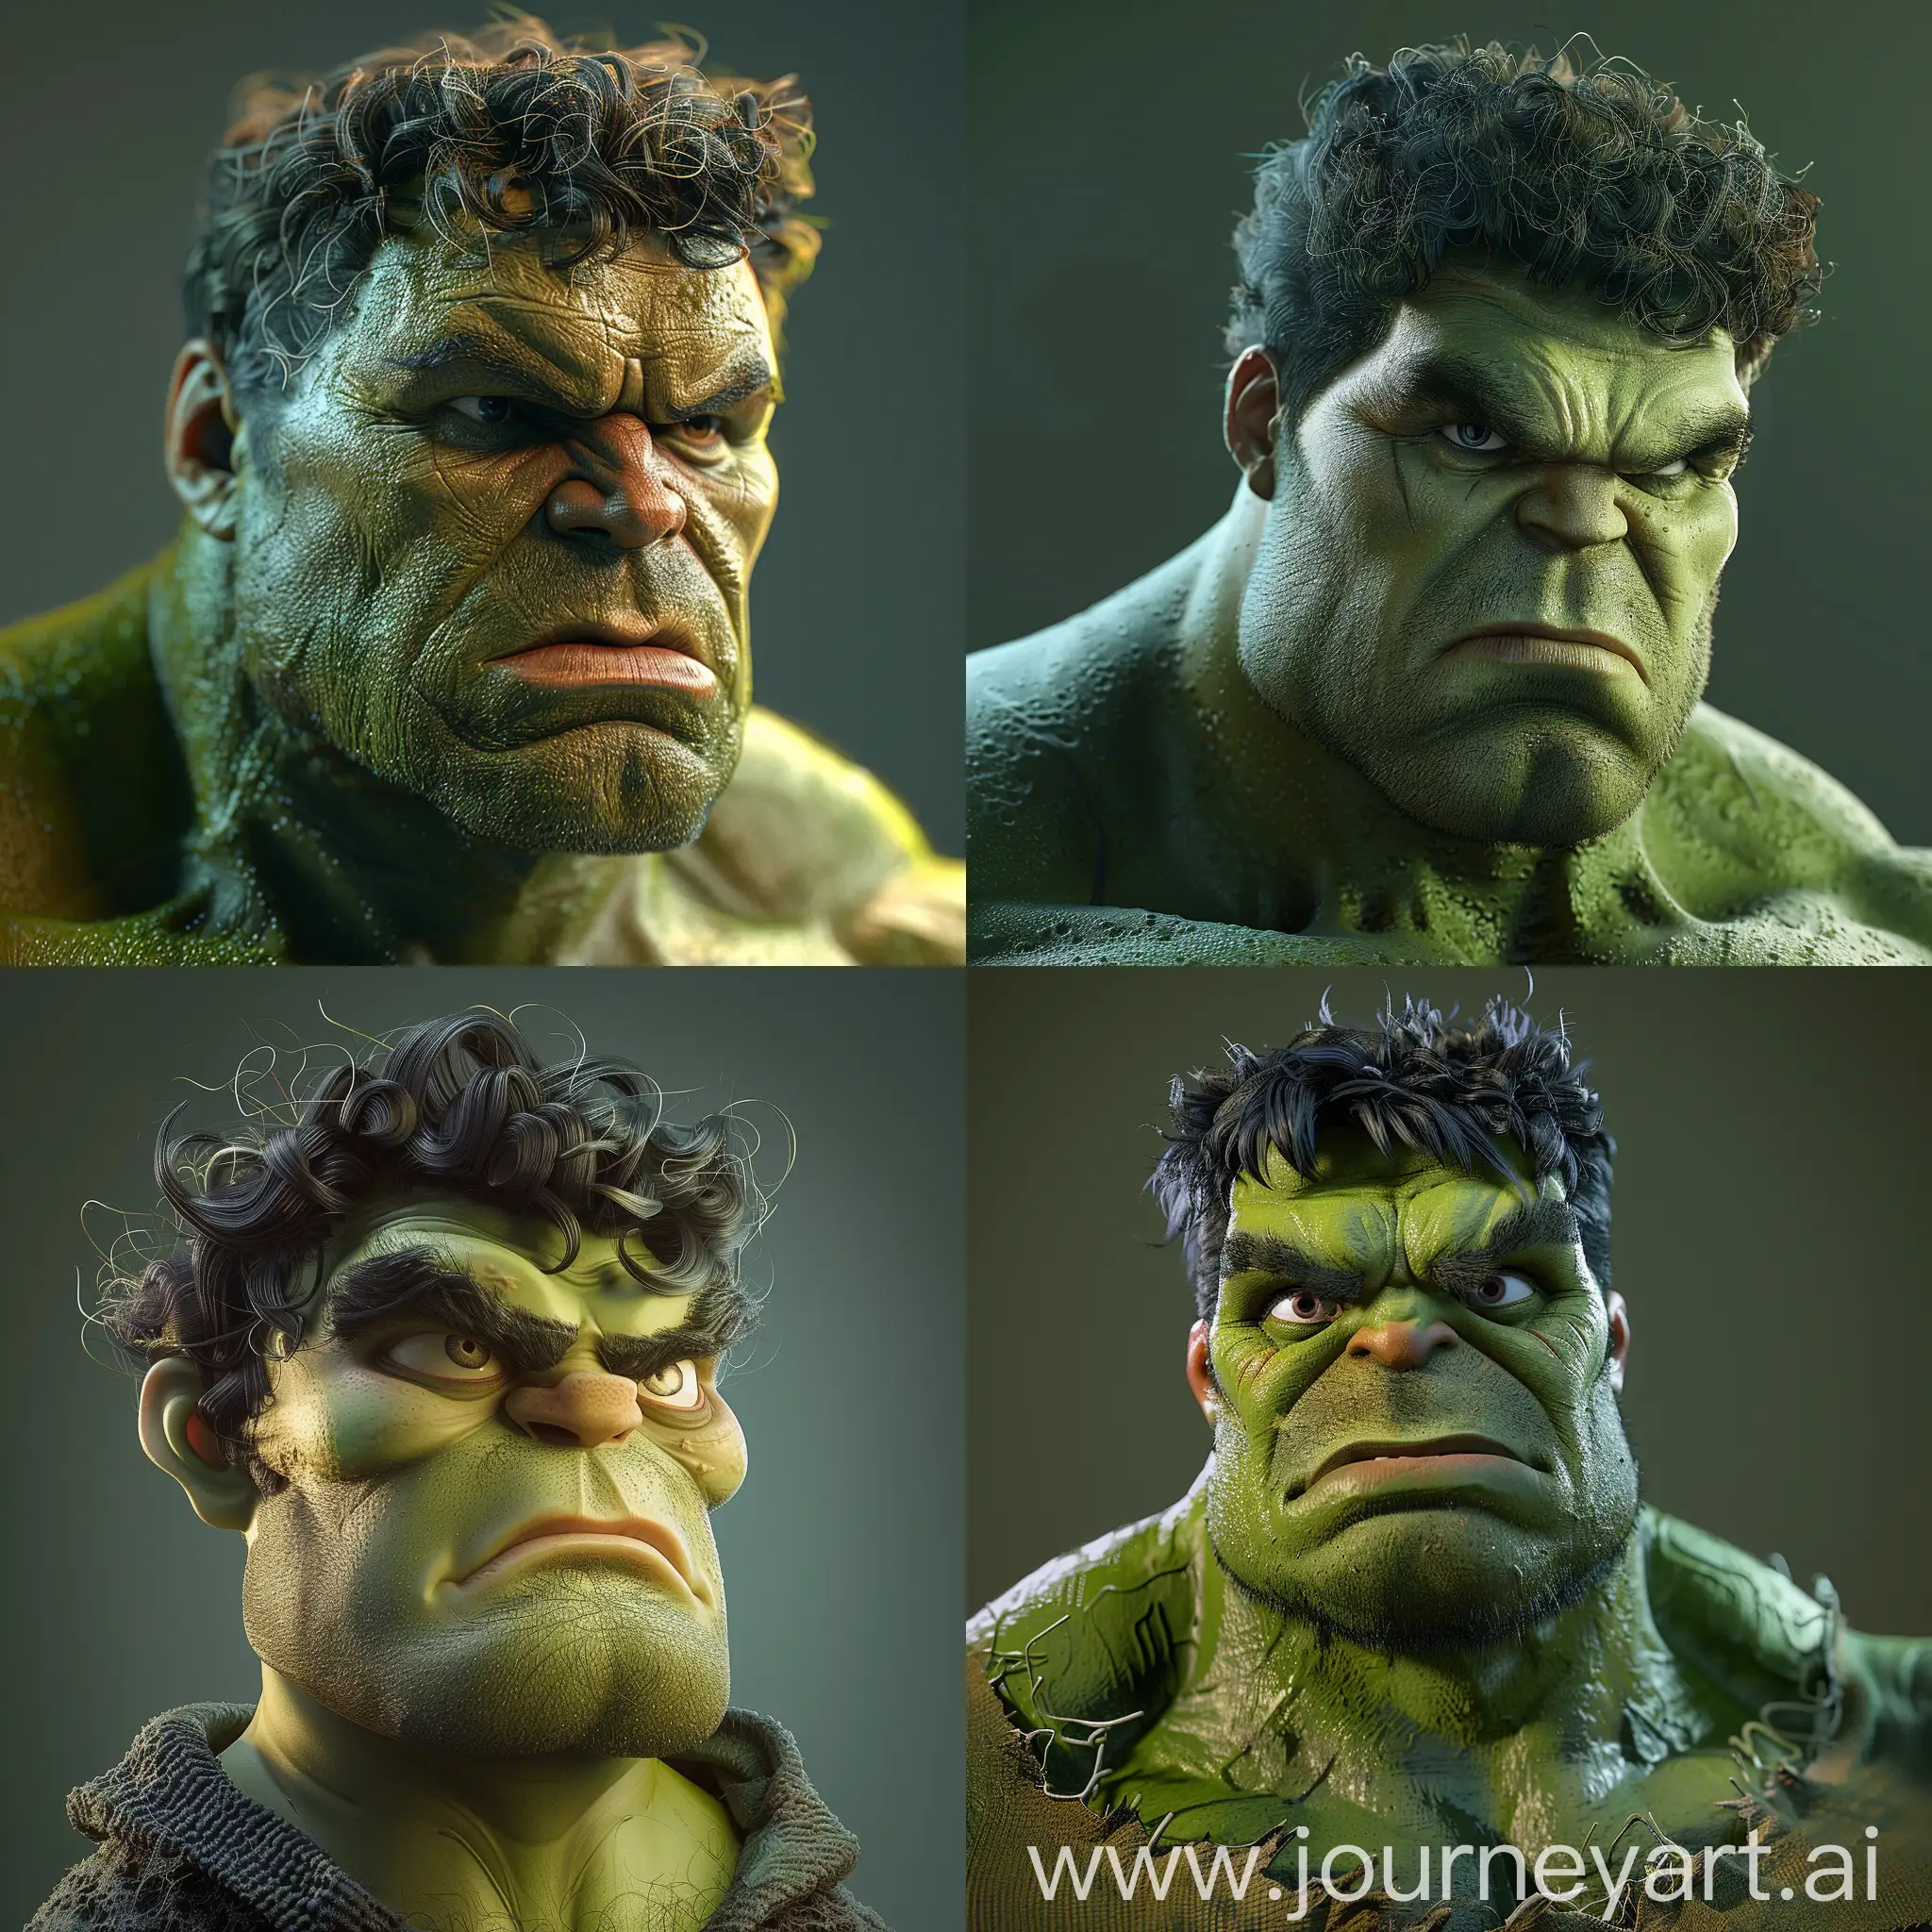 A Pixar style portrait of the character [hulk] from the series Game of Thrones, rendered in 3D in the style of Pixar. 